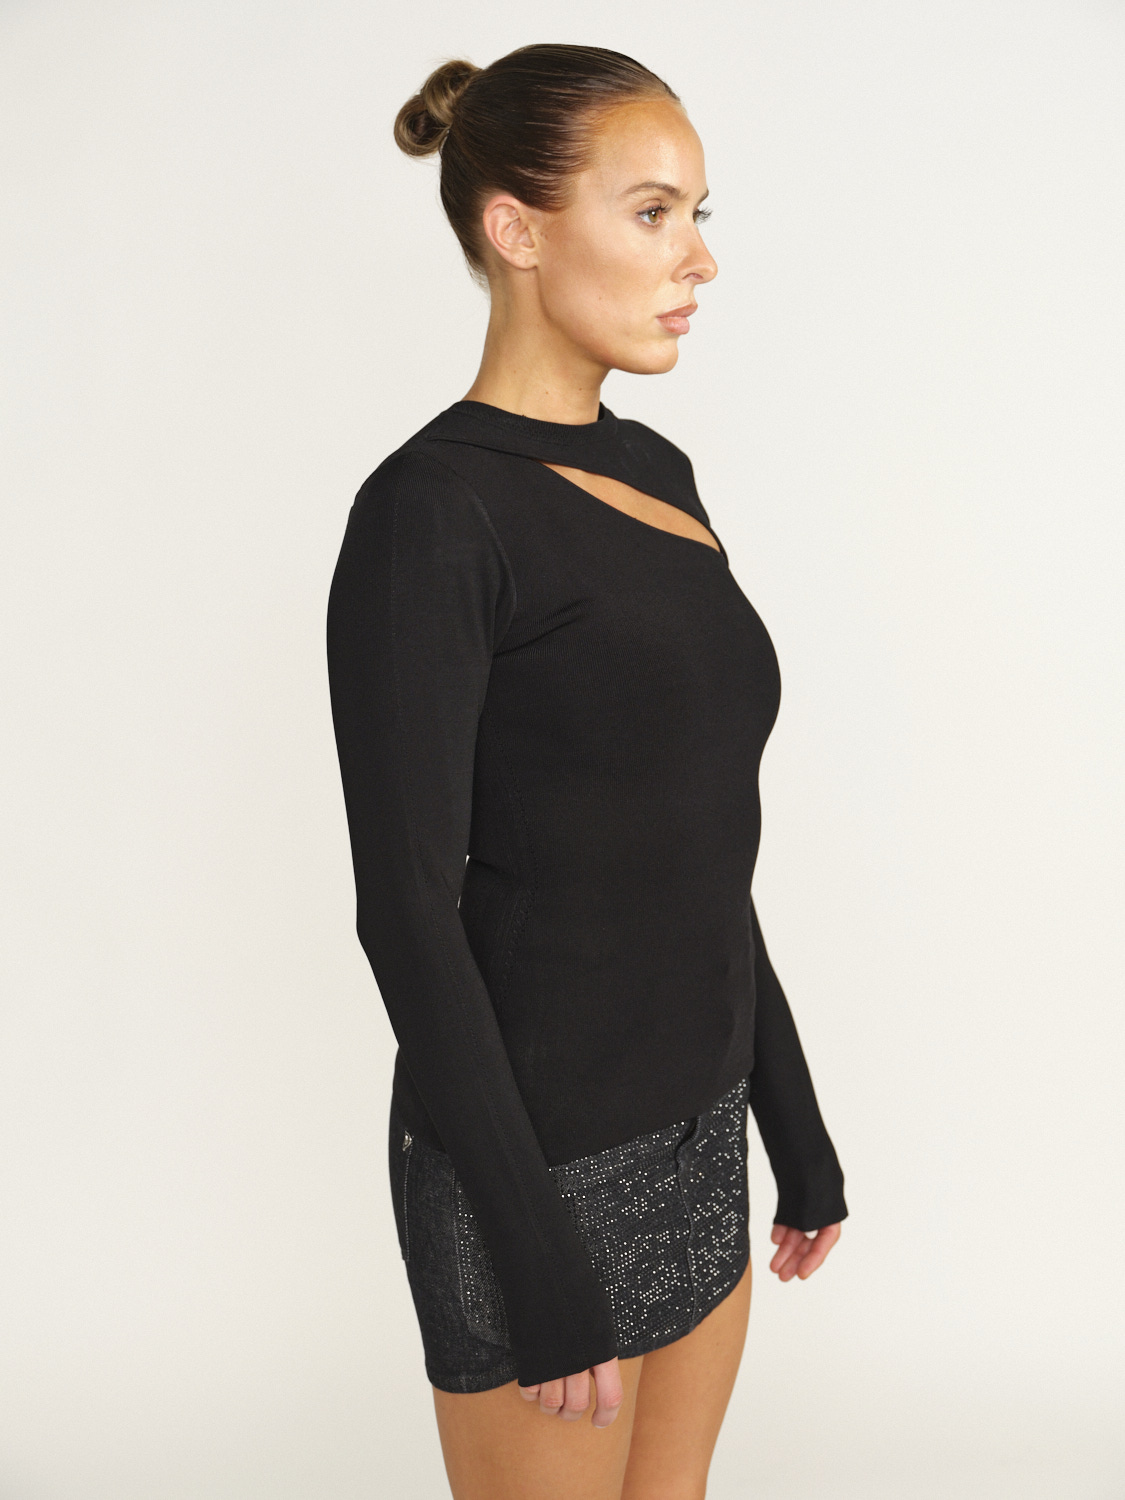 Victoria Beckham Cut Out Shirt - Figure-hugging long-sleeved shirt with cut-outs black 36